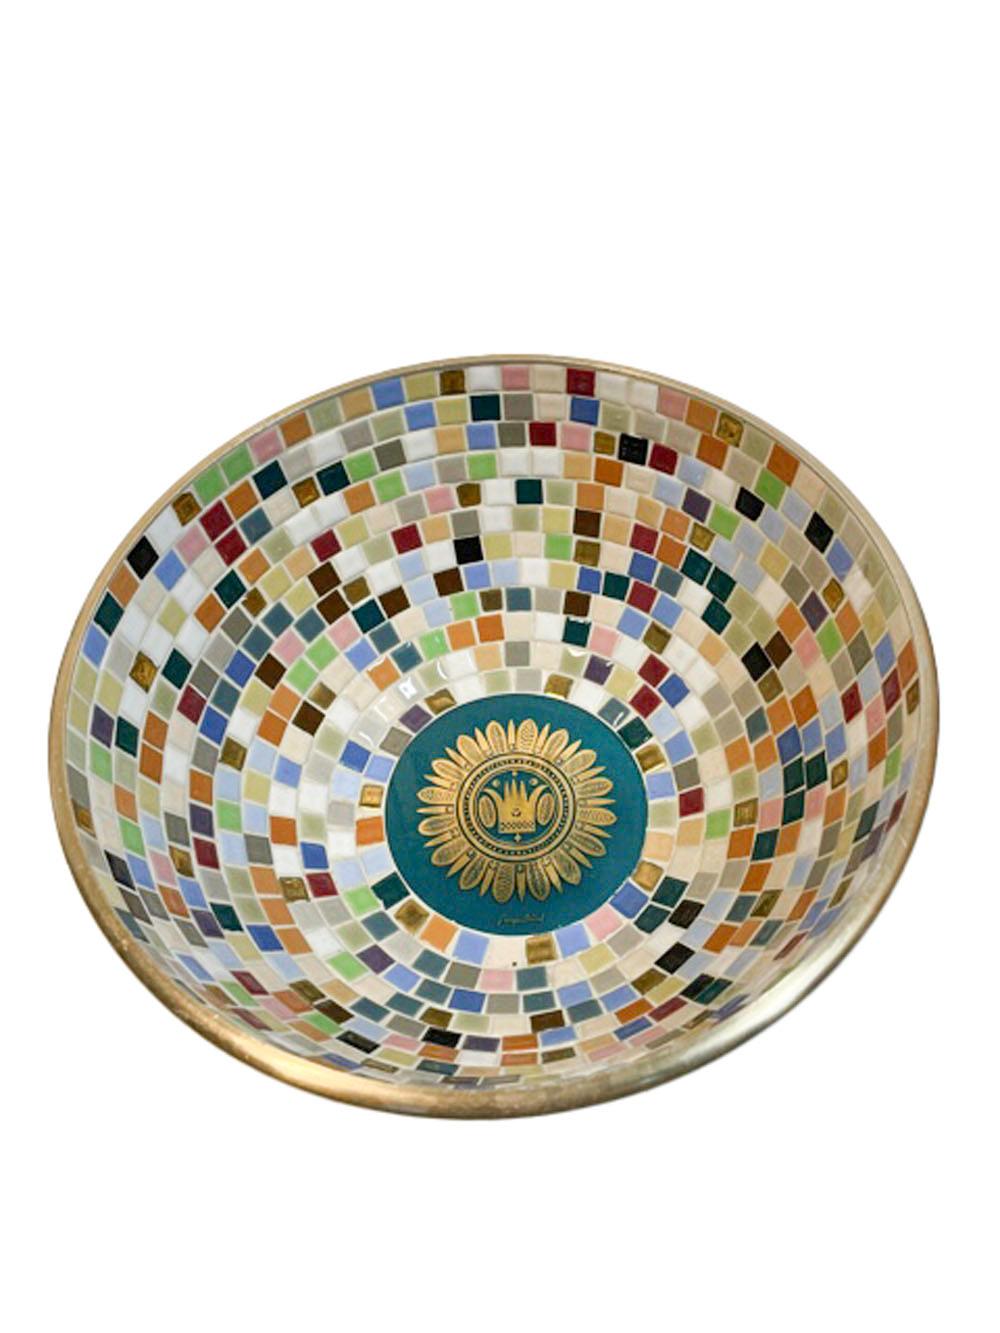 Mid-Century Modern Vintage Georges Briard Brass Bowl with Tiled Interior in the Regalia Pattern For Sale